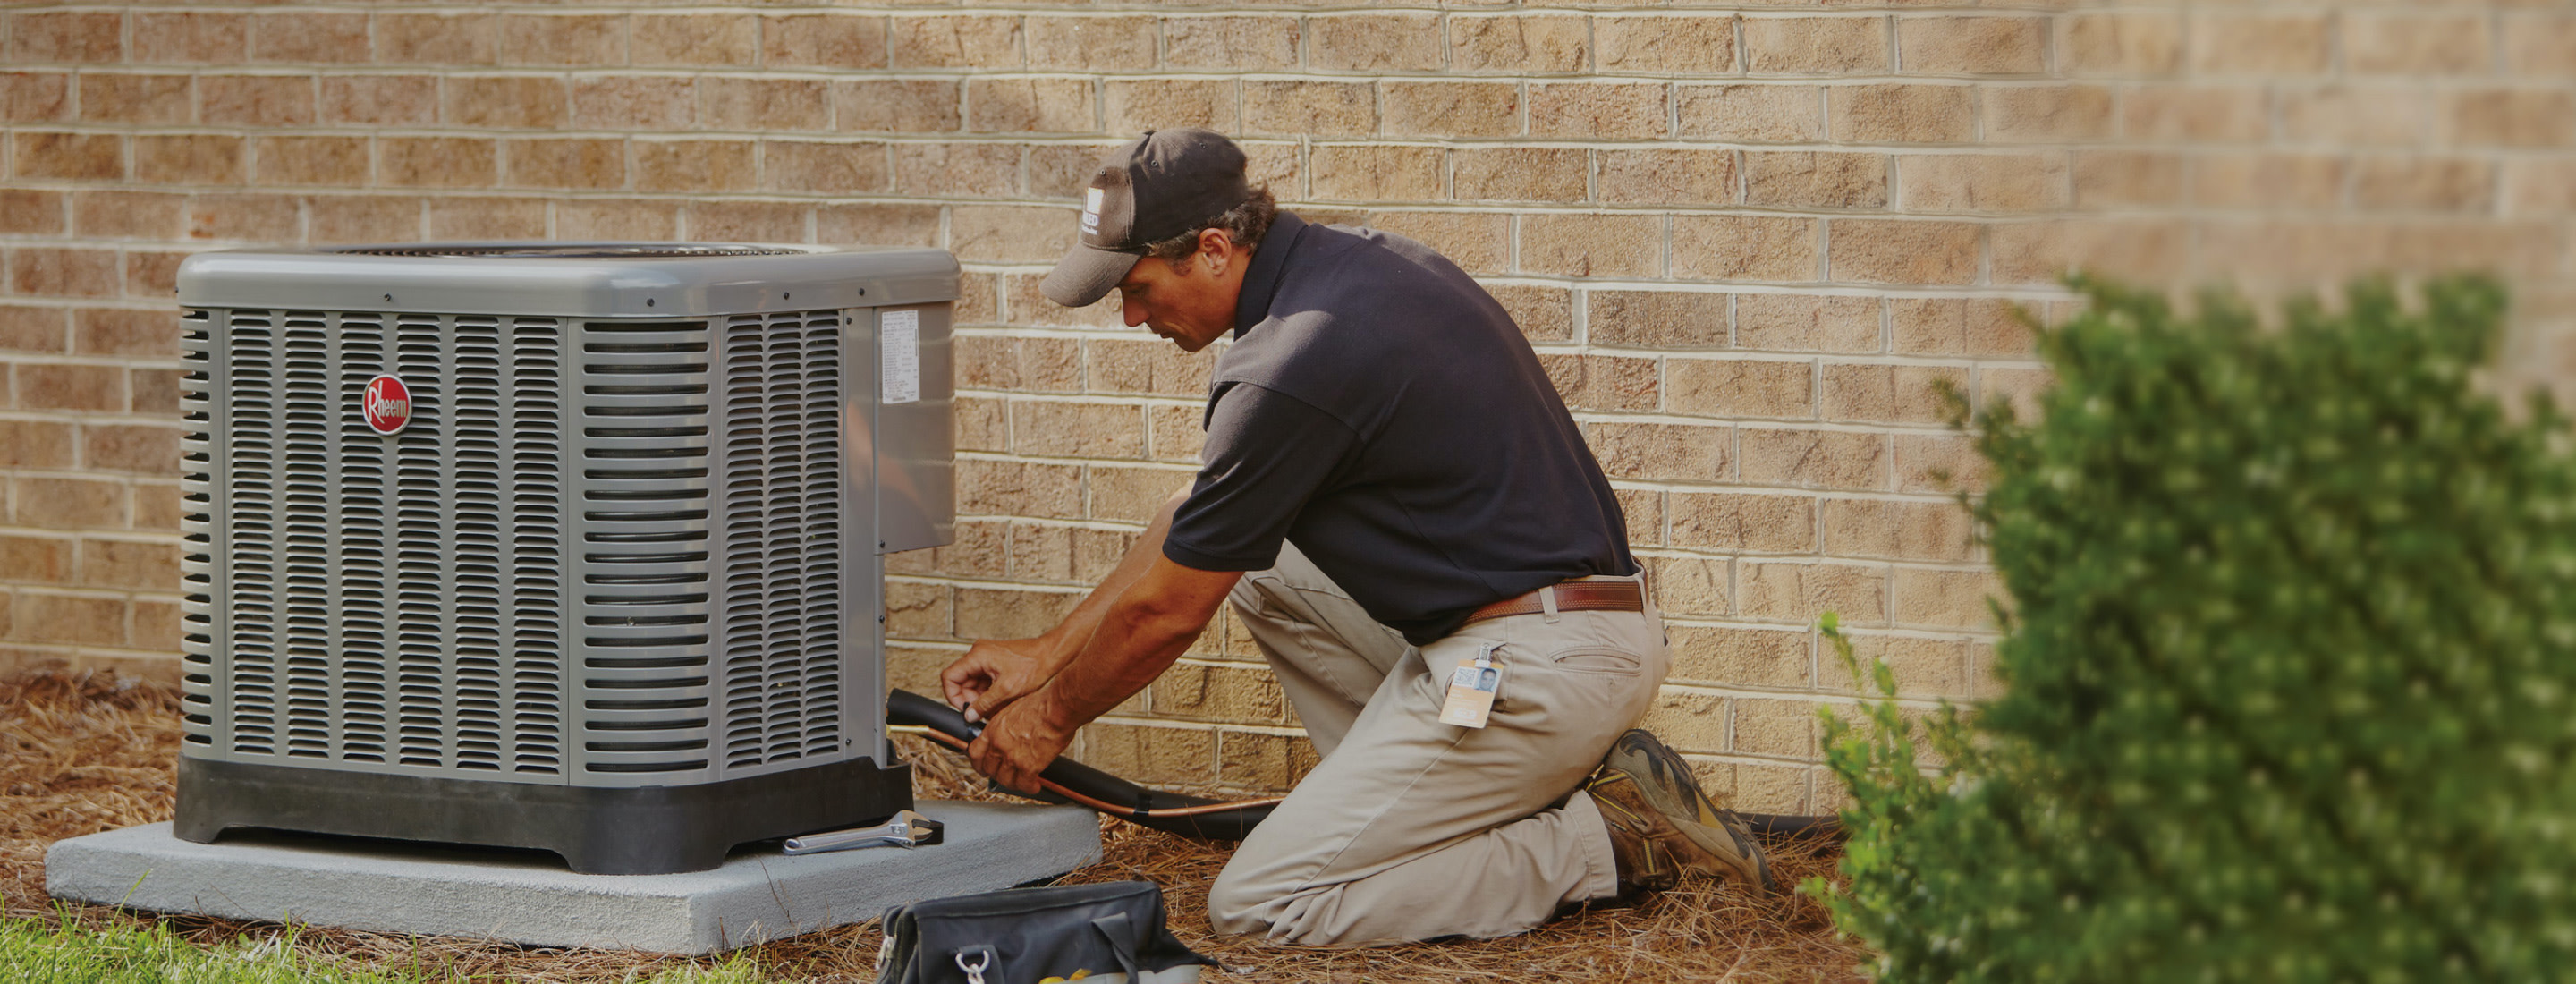 Air Conditioning & Furnace Repair at The Home Depot